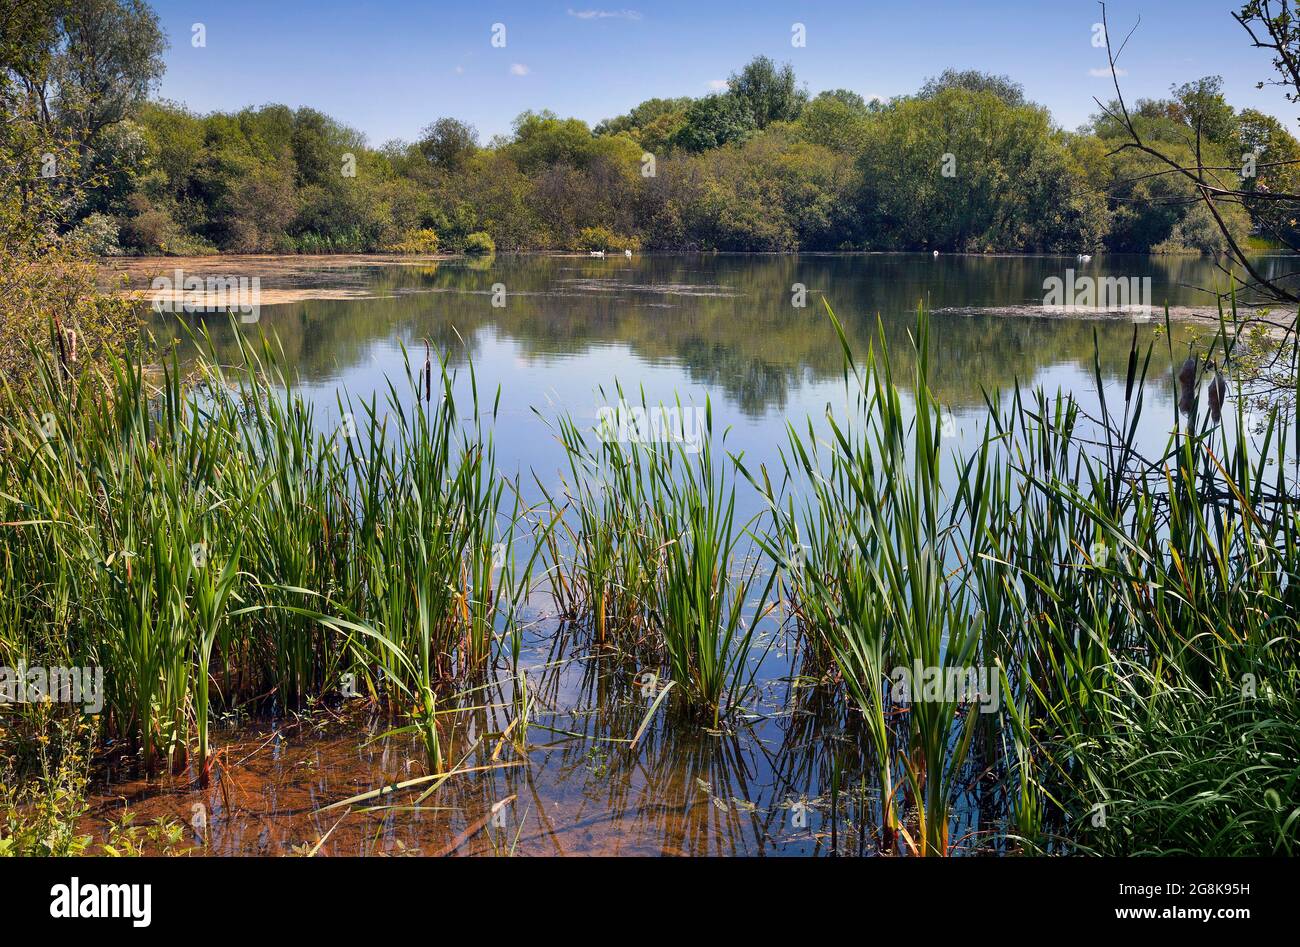 Rushden LAKES, Northamptonshire, UK, General view with reeds, waterplants Stock Photo